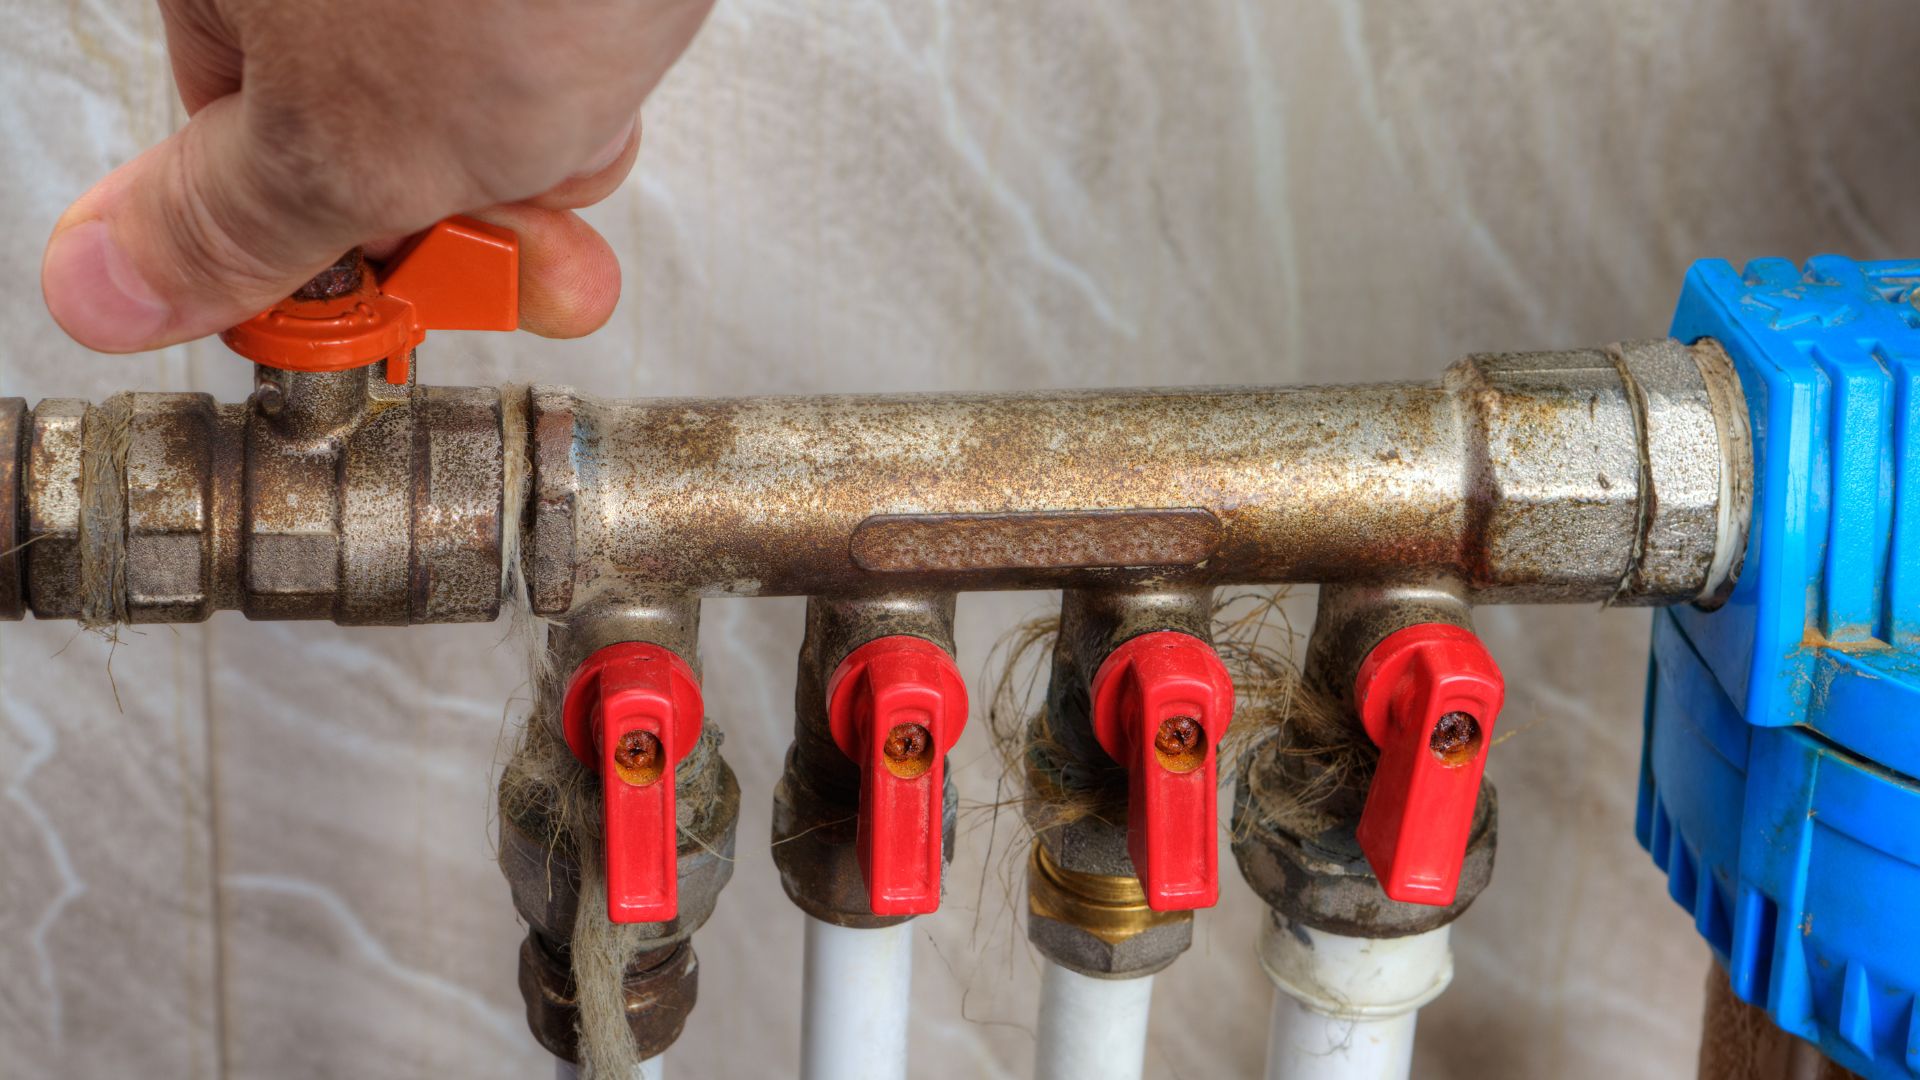 Plumbers' Guide to Turning Off the Water Supply